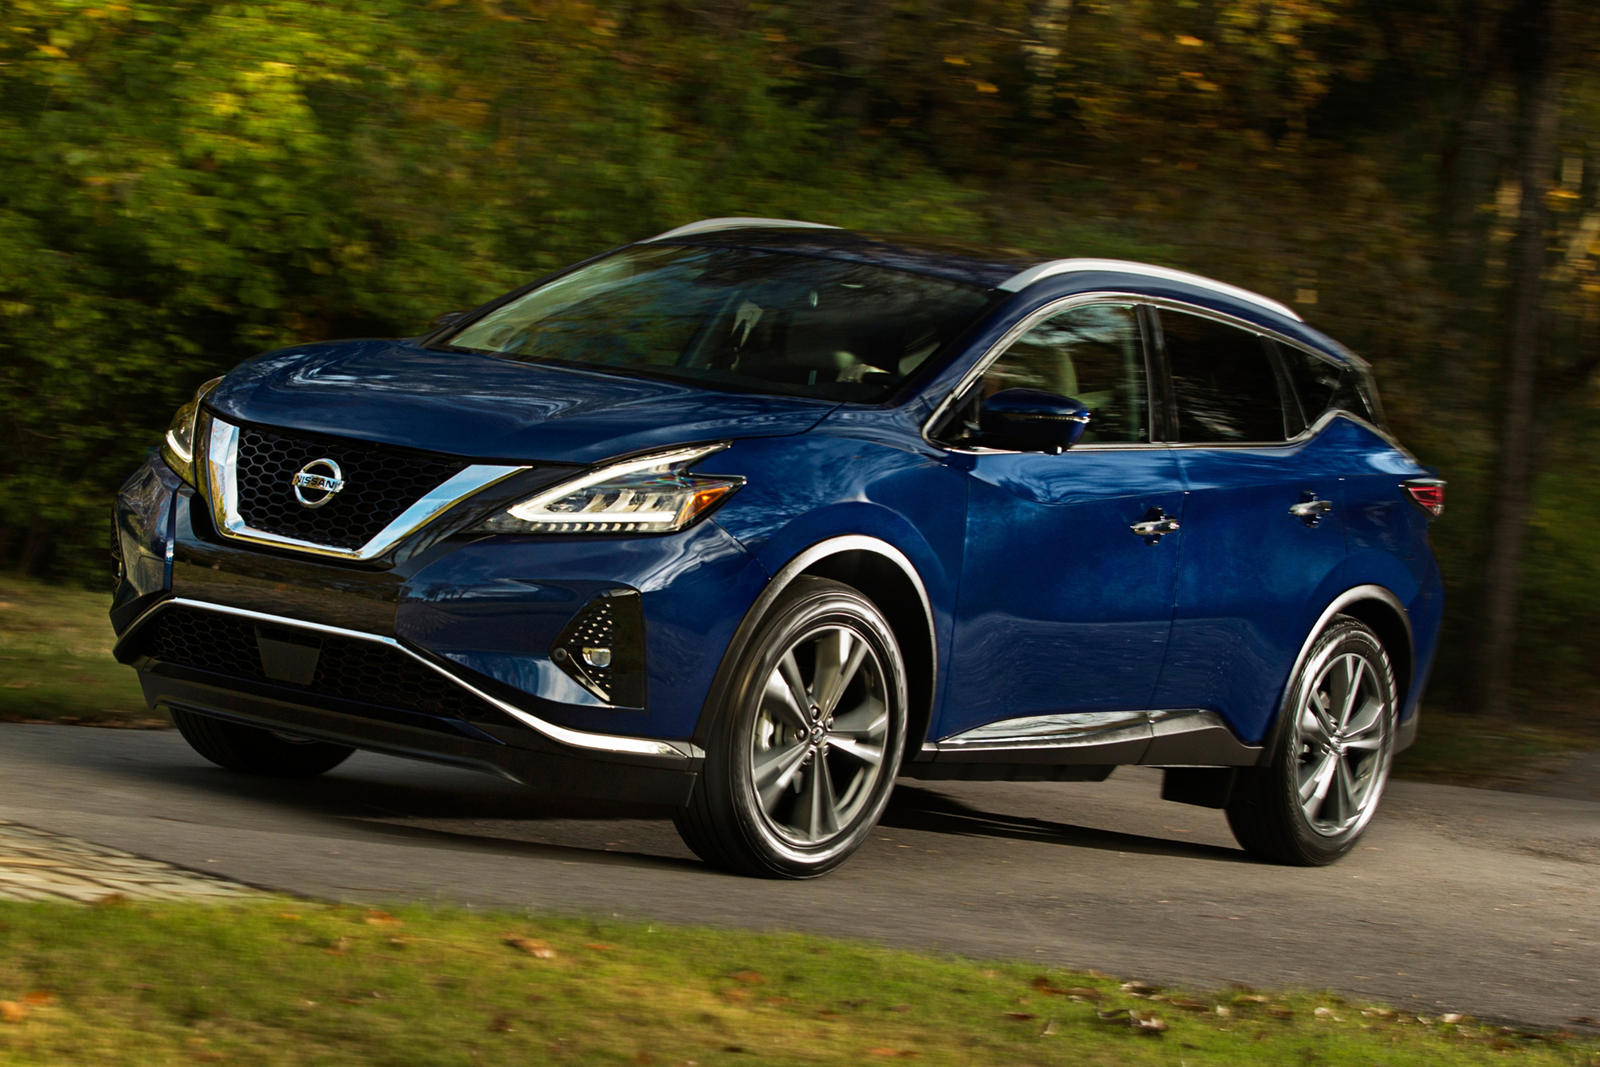 2019 Nissan Murano Arrives In America With A Minor Price Increase | CarBuzz